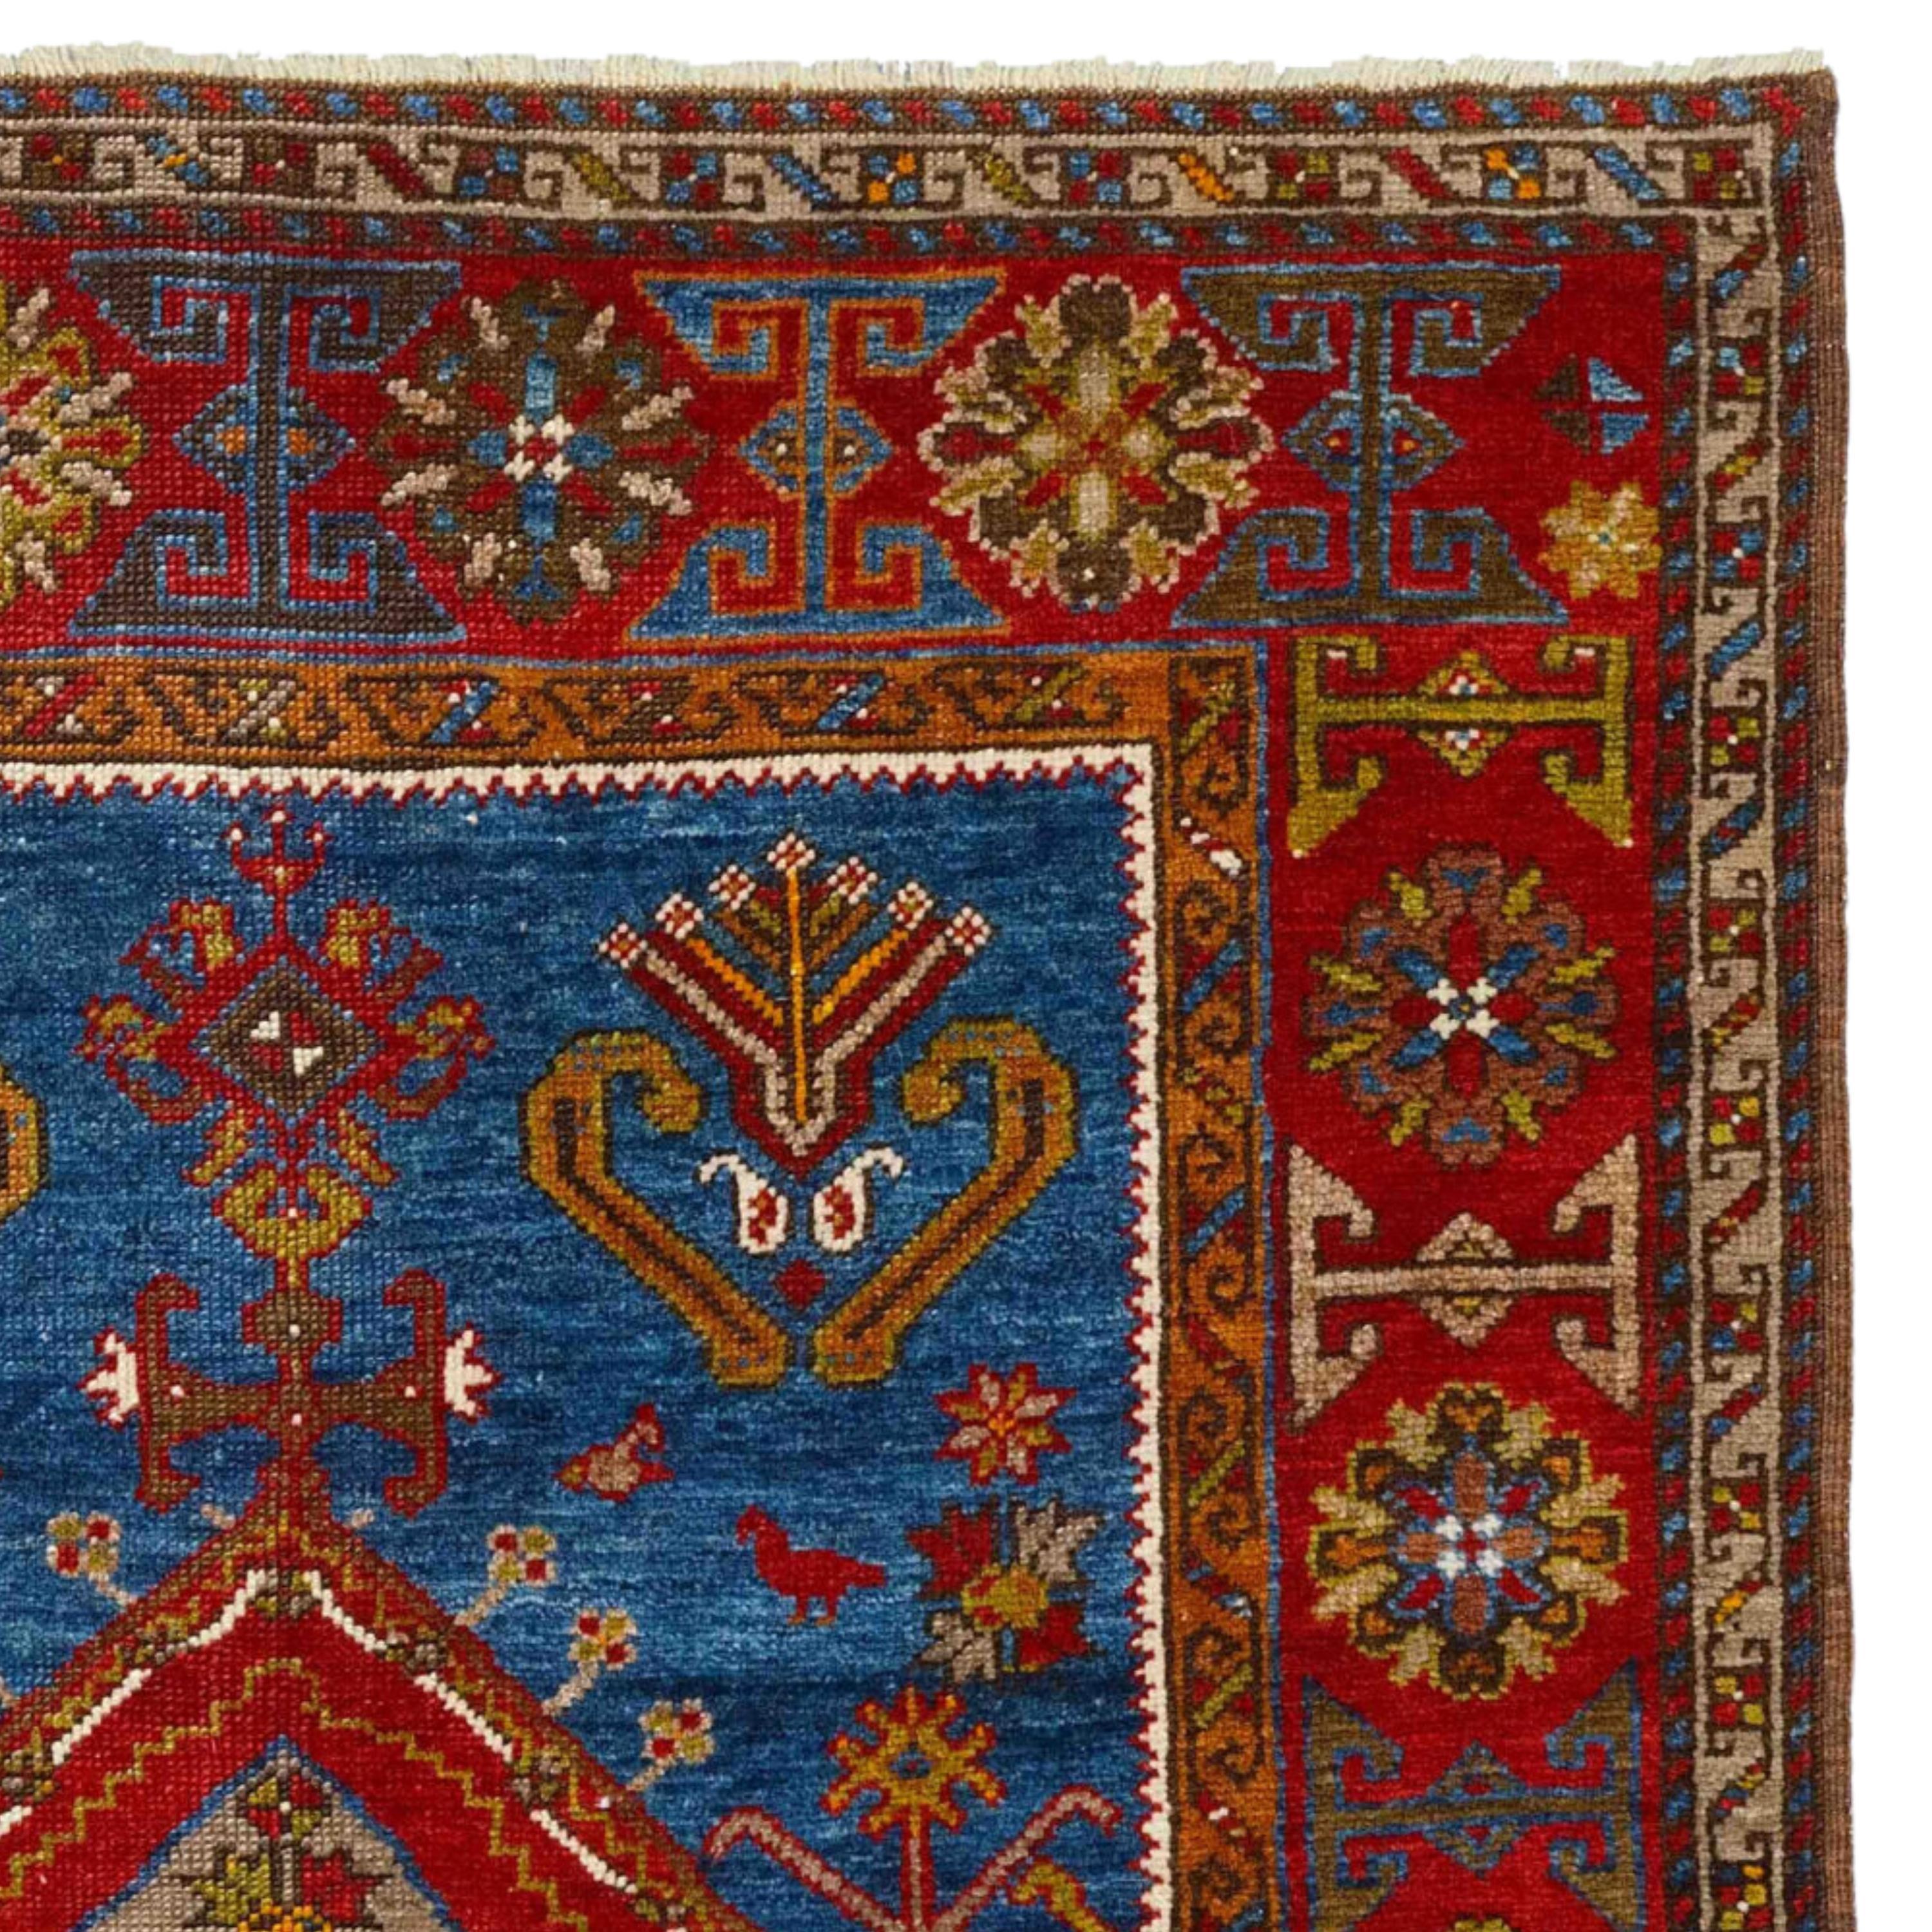 Antique Yahyali Rug - Late of 19th Century Central Anatolian Yahyali Rug In Good Condition For Sale In Sultanahmet, 34